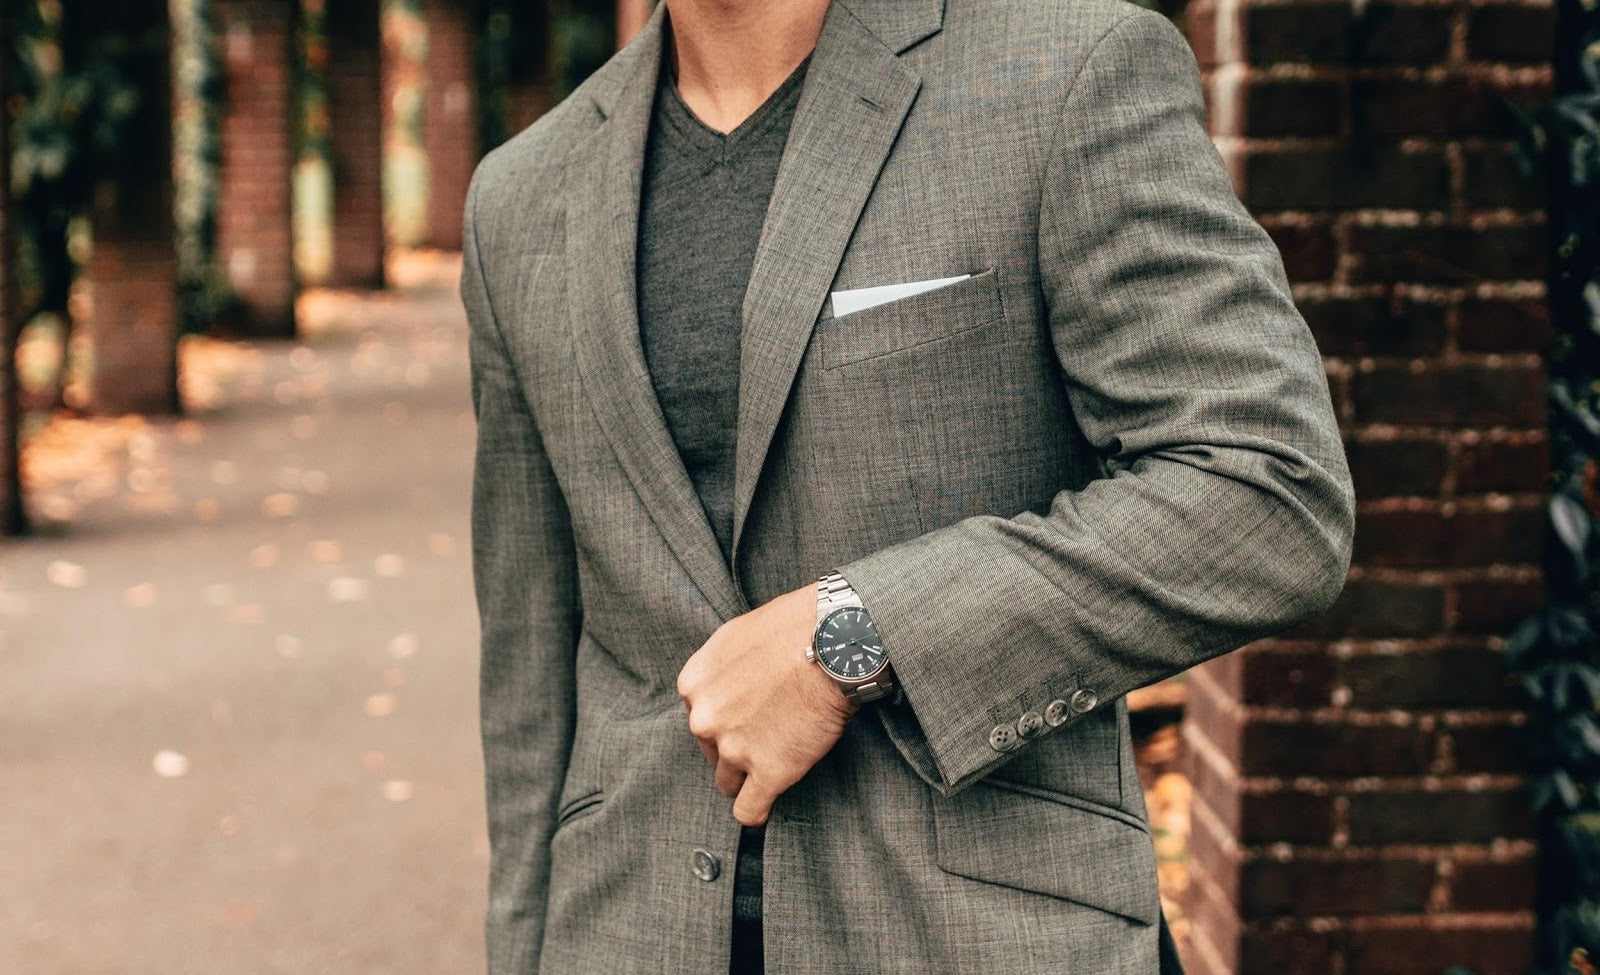 The Perfect Friday Eve Outfit Is A T-shirt And Suit Combination